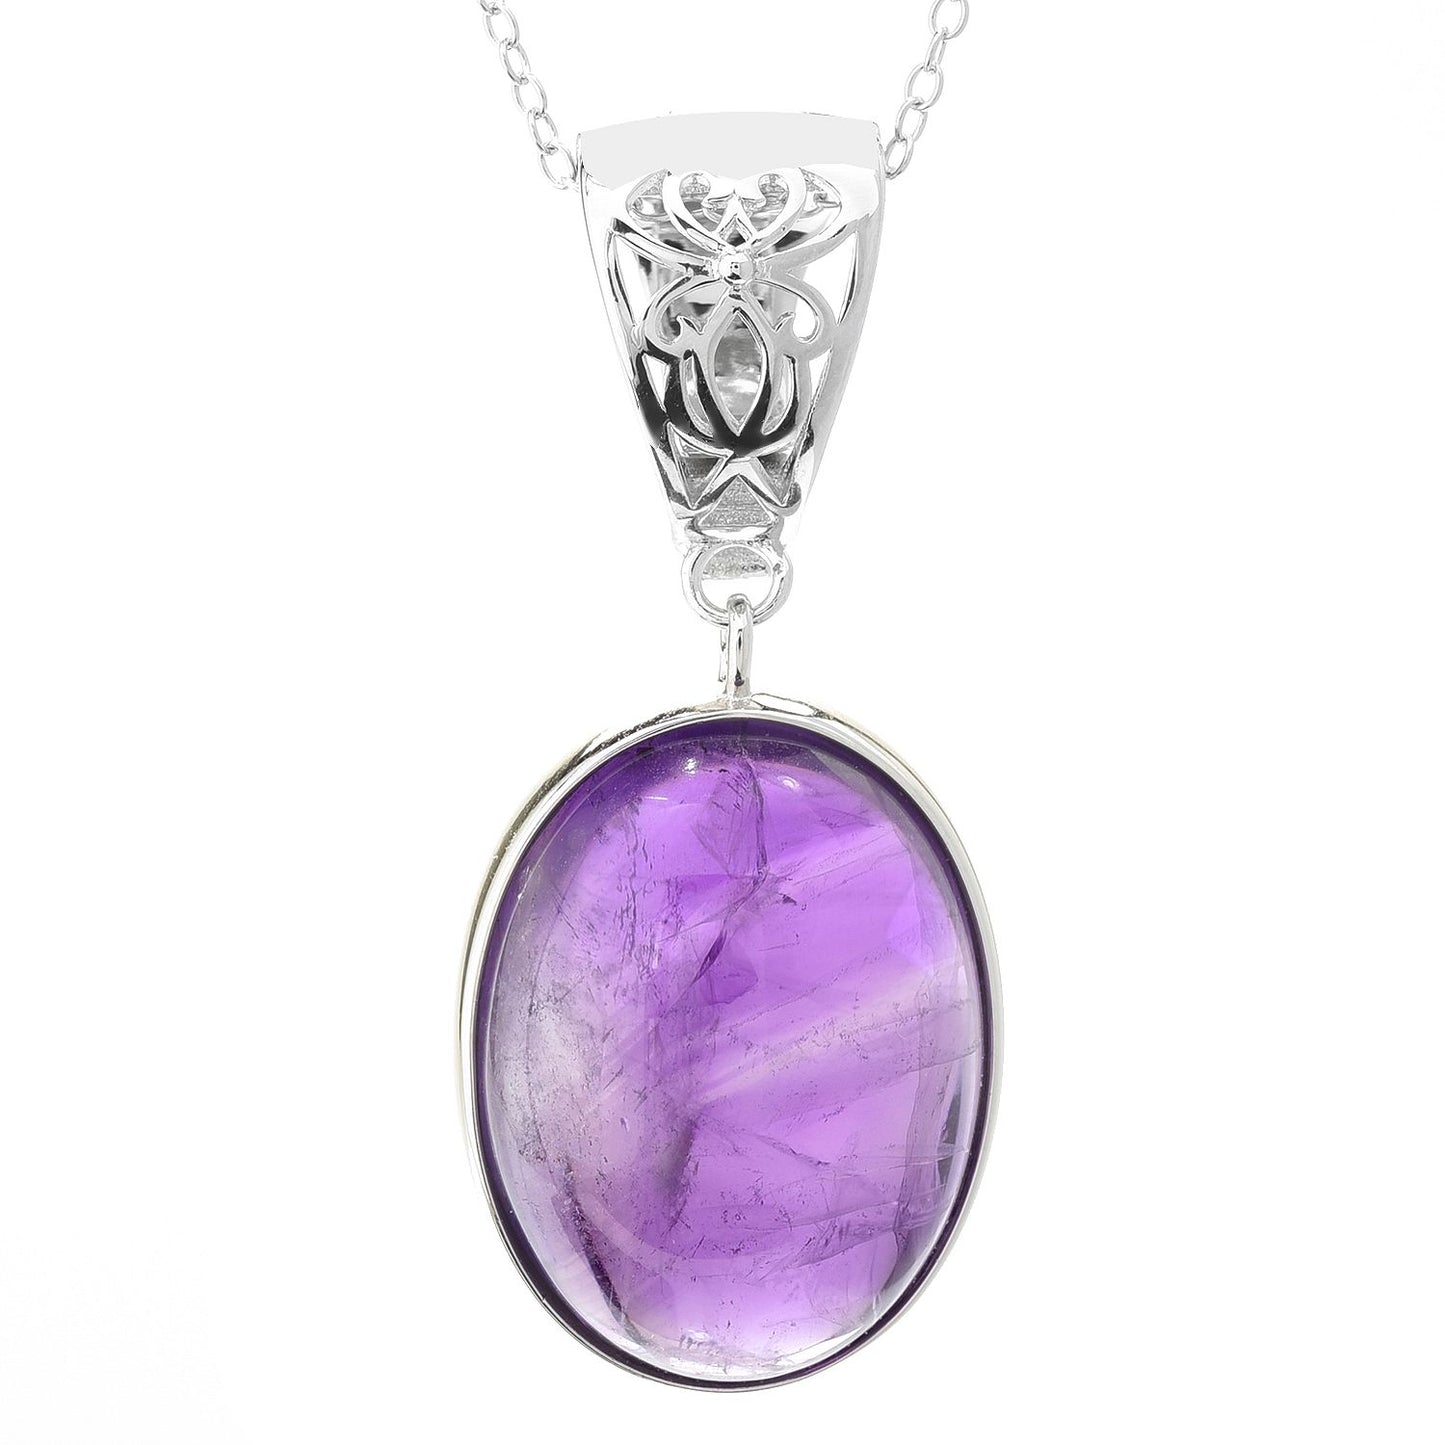 Sterling Silver 20 x 15mm Oval African Amethyst Enhancer Pendant w/ 18" Chain - Pinctore